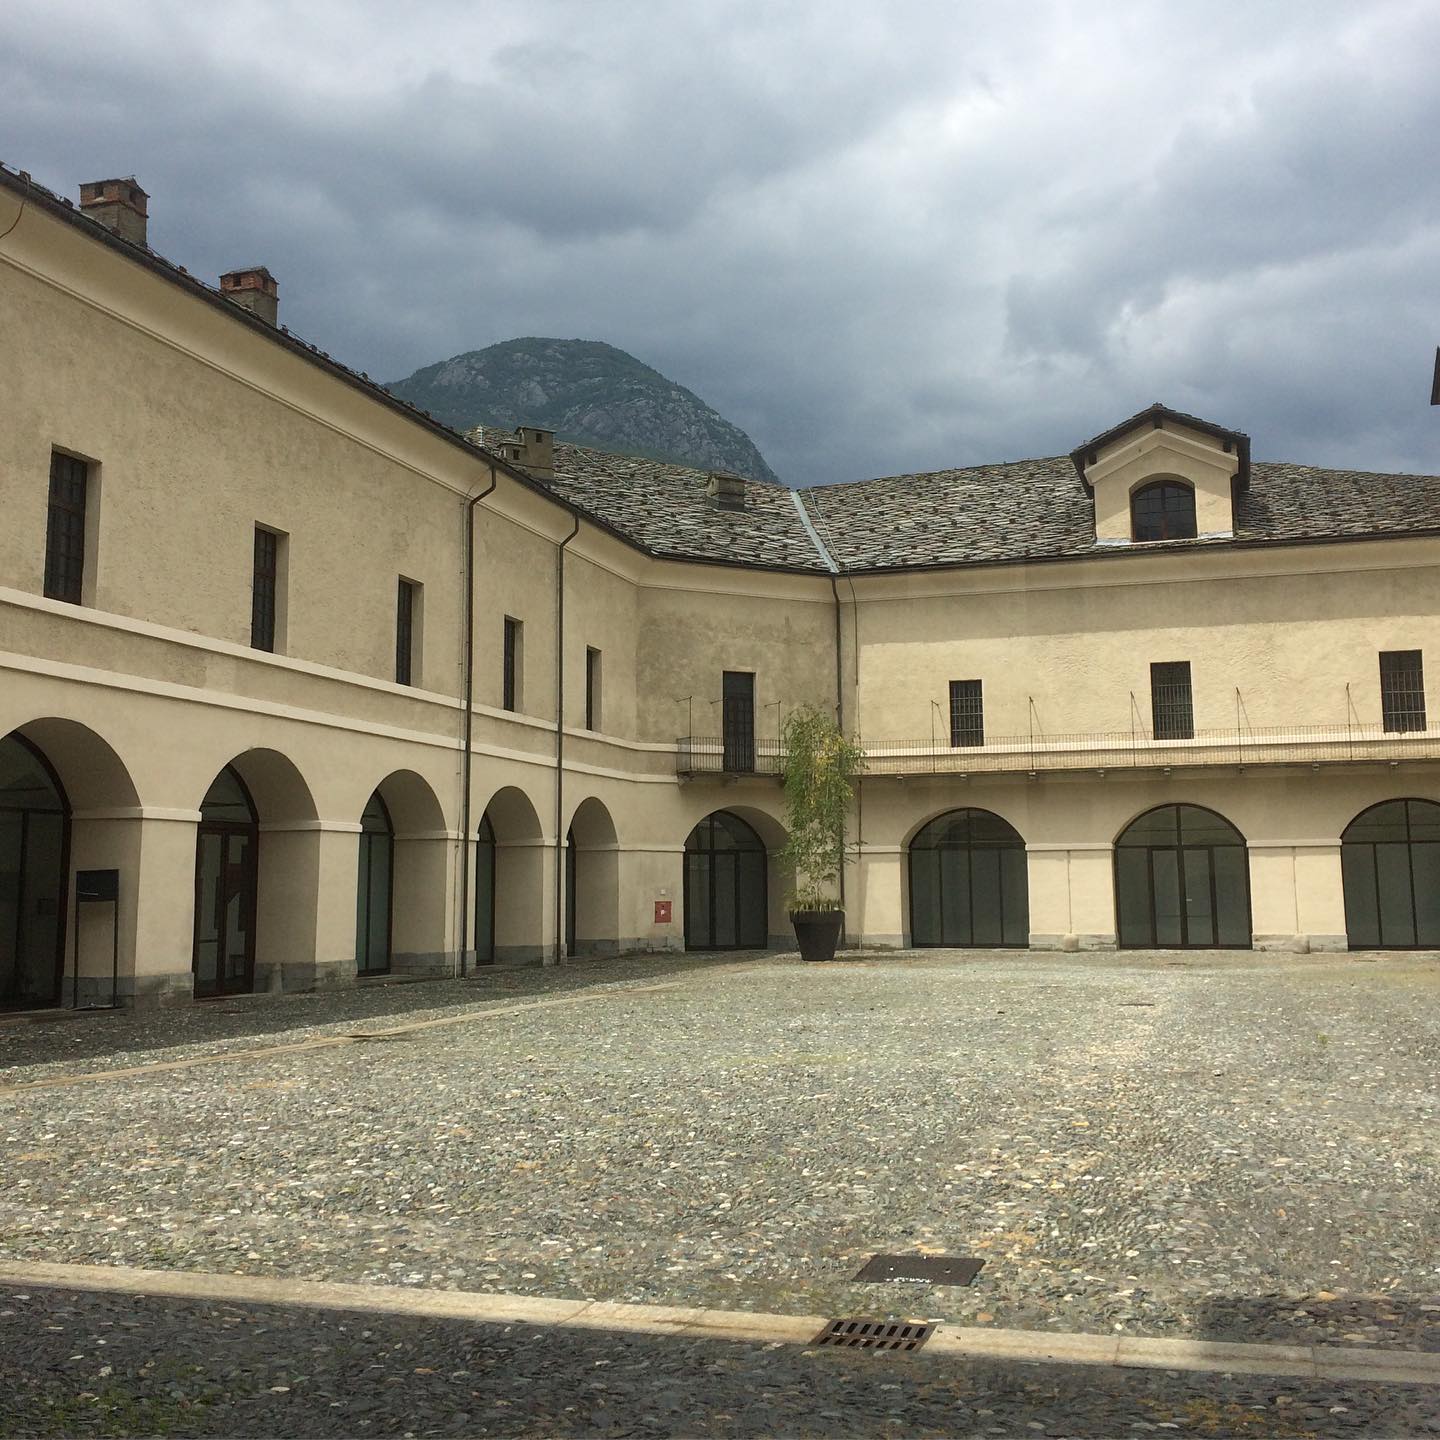 A courtyard with the mountains around and dark clouds in the sky. The right place to think about life
-
#bard #fortress #aostavalley #travelphotography #travel #travelgram #travelblogger #traveling #architecture #creatorshala #creatorshalablogger